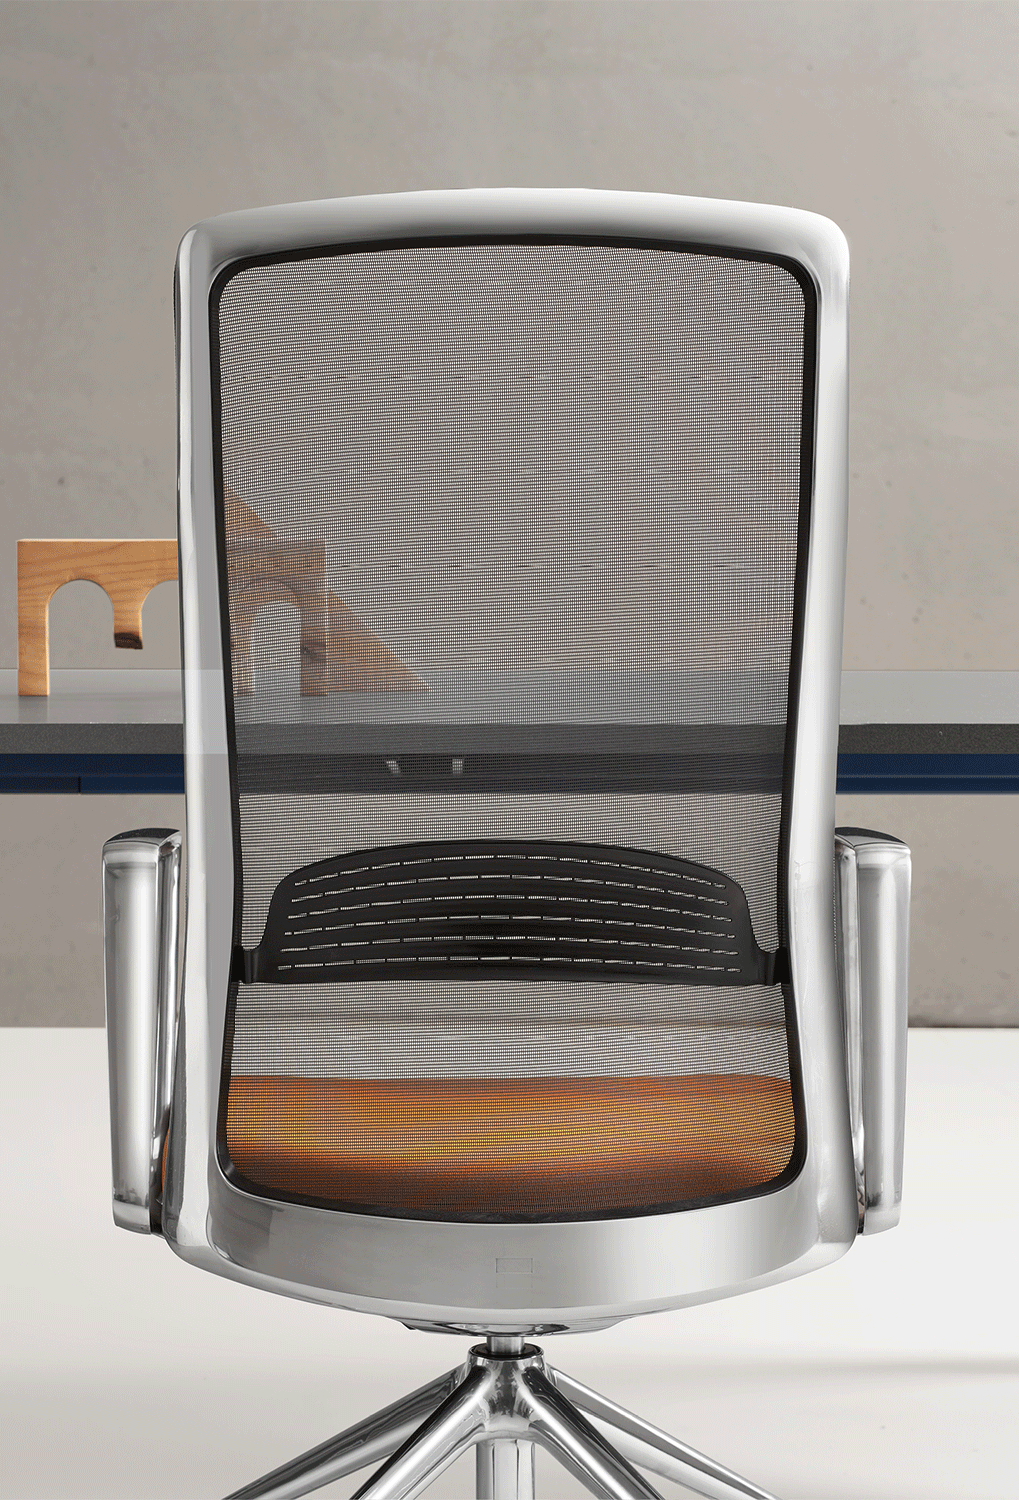 That's it - designed chair by Quinti